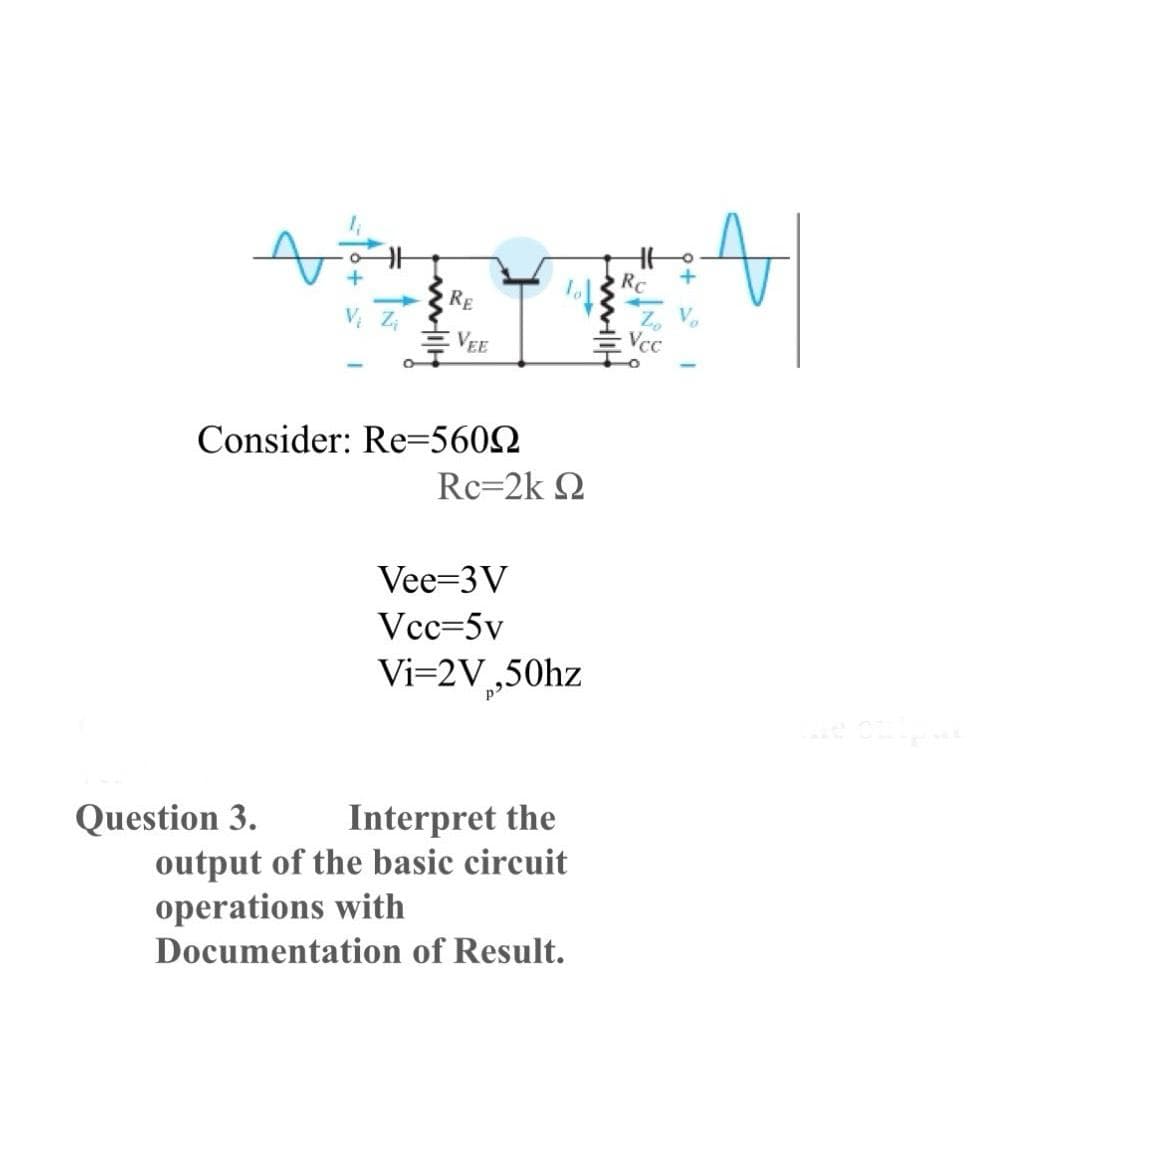 RE
Question 3.
VEE
Consider: Re=5600
Rc=2K Q
Vee-3V
Vcc=5v
Vi=2V₂,50hz
Interpret the
output of the basic circuit
operations with
Documentation of Result.
Vcc
t
le on